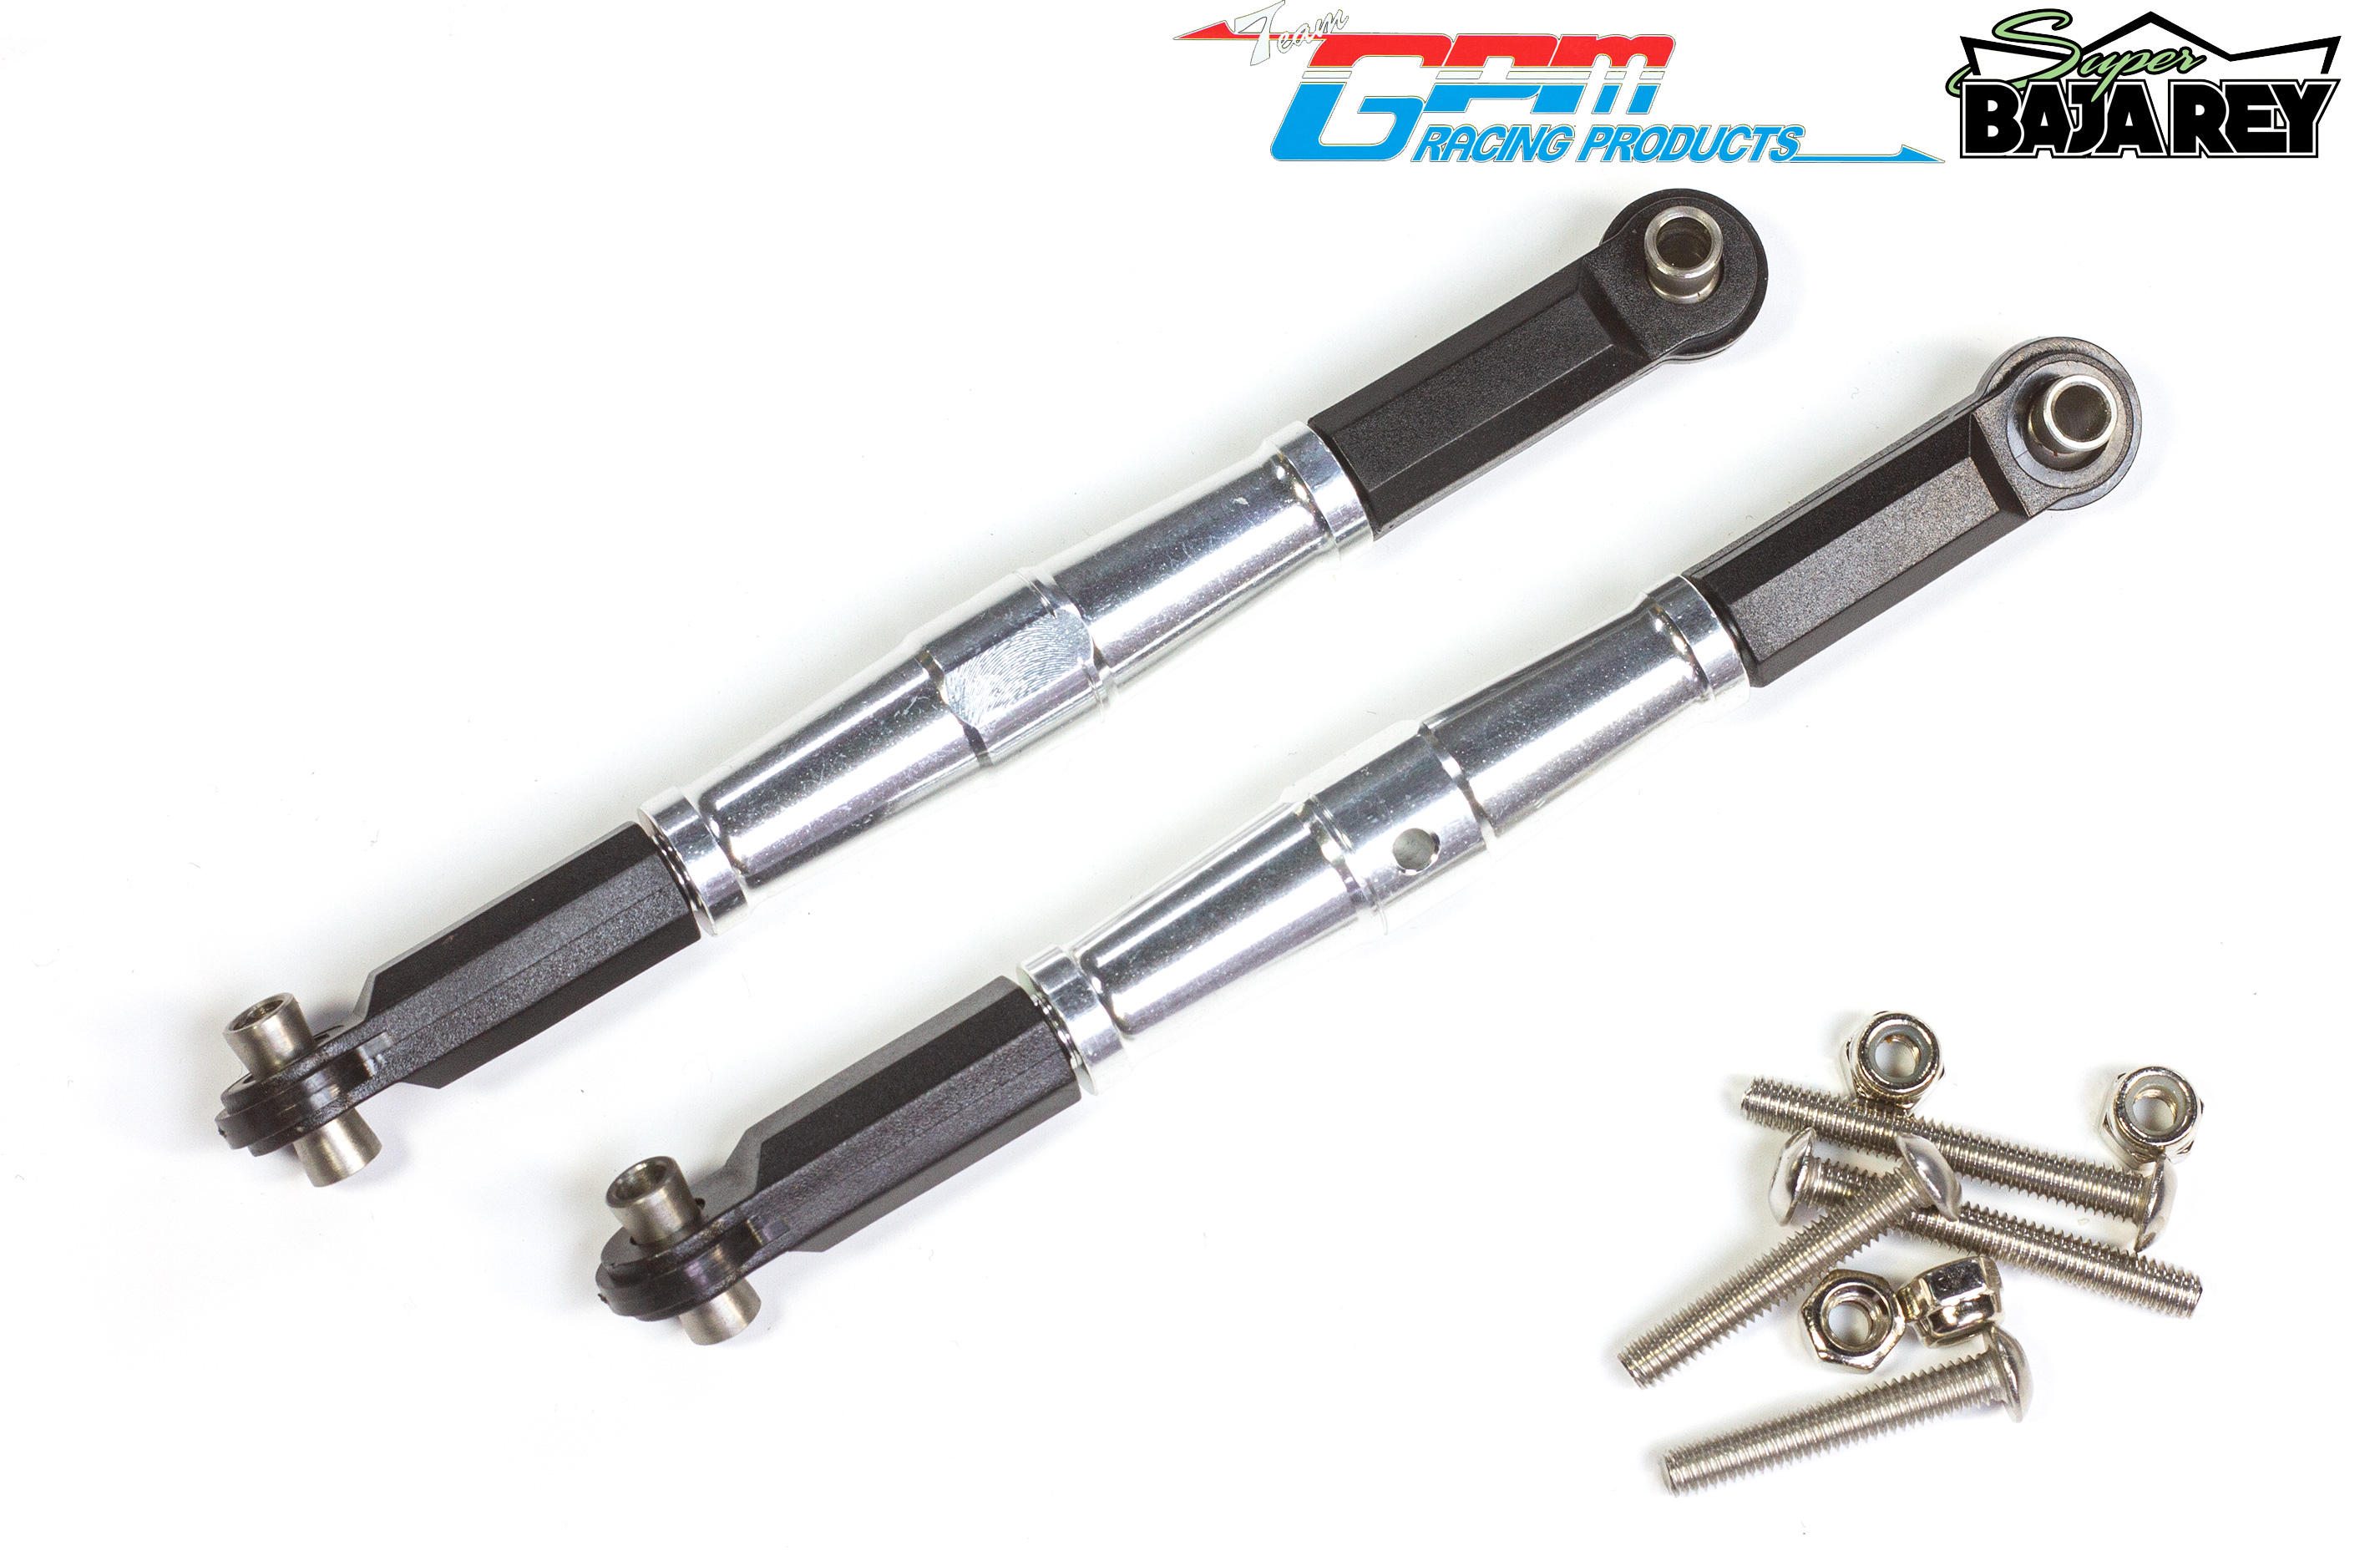 SB162 GPM tie rods with turnbuckle for Super Baja Rey.